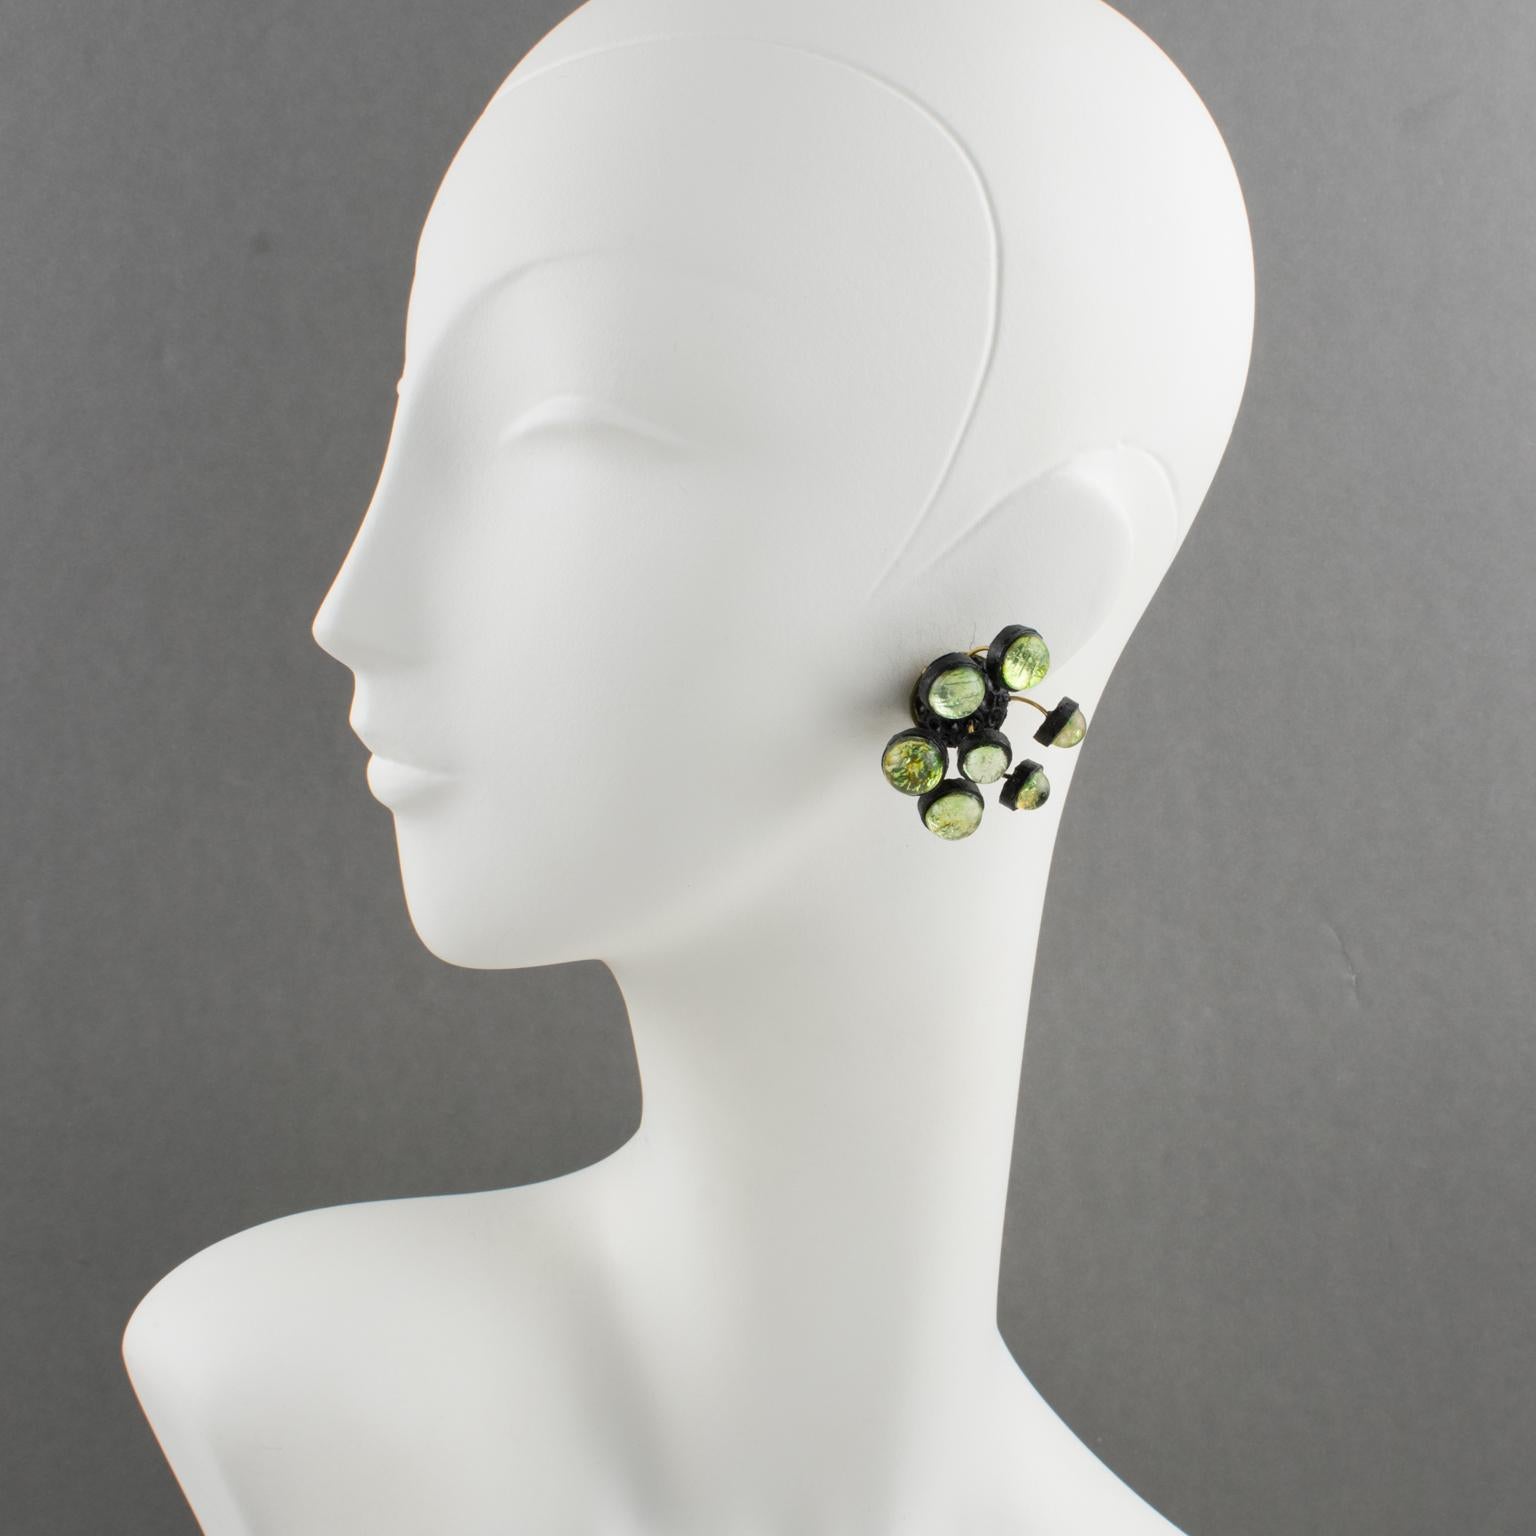 Stunning French Jewelry Designer Monique Vedie Paris clip-on earrings. Dimensional shape with sputnik-inspired design, in black resin or Talosel, topped with green resin cabochons. Monique Vedie vintage resin jewelry is always